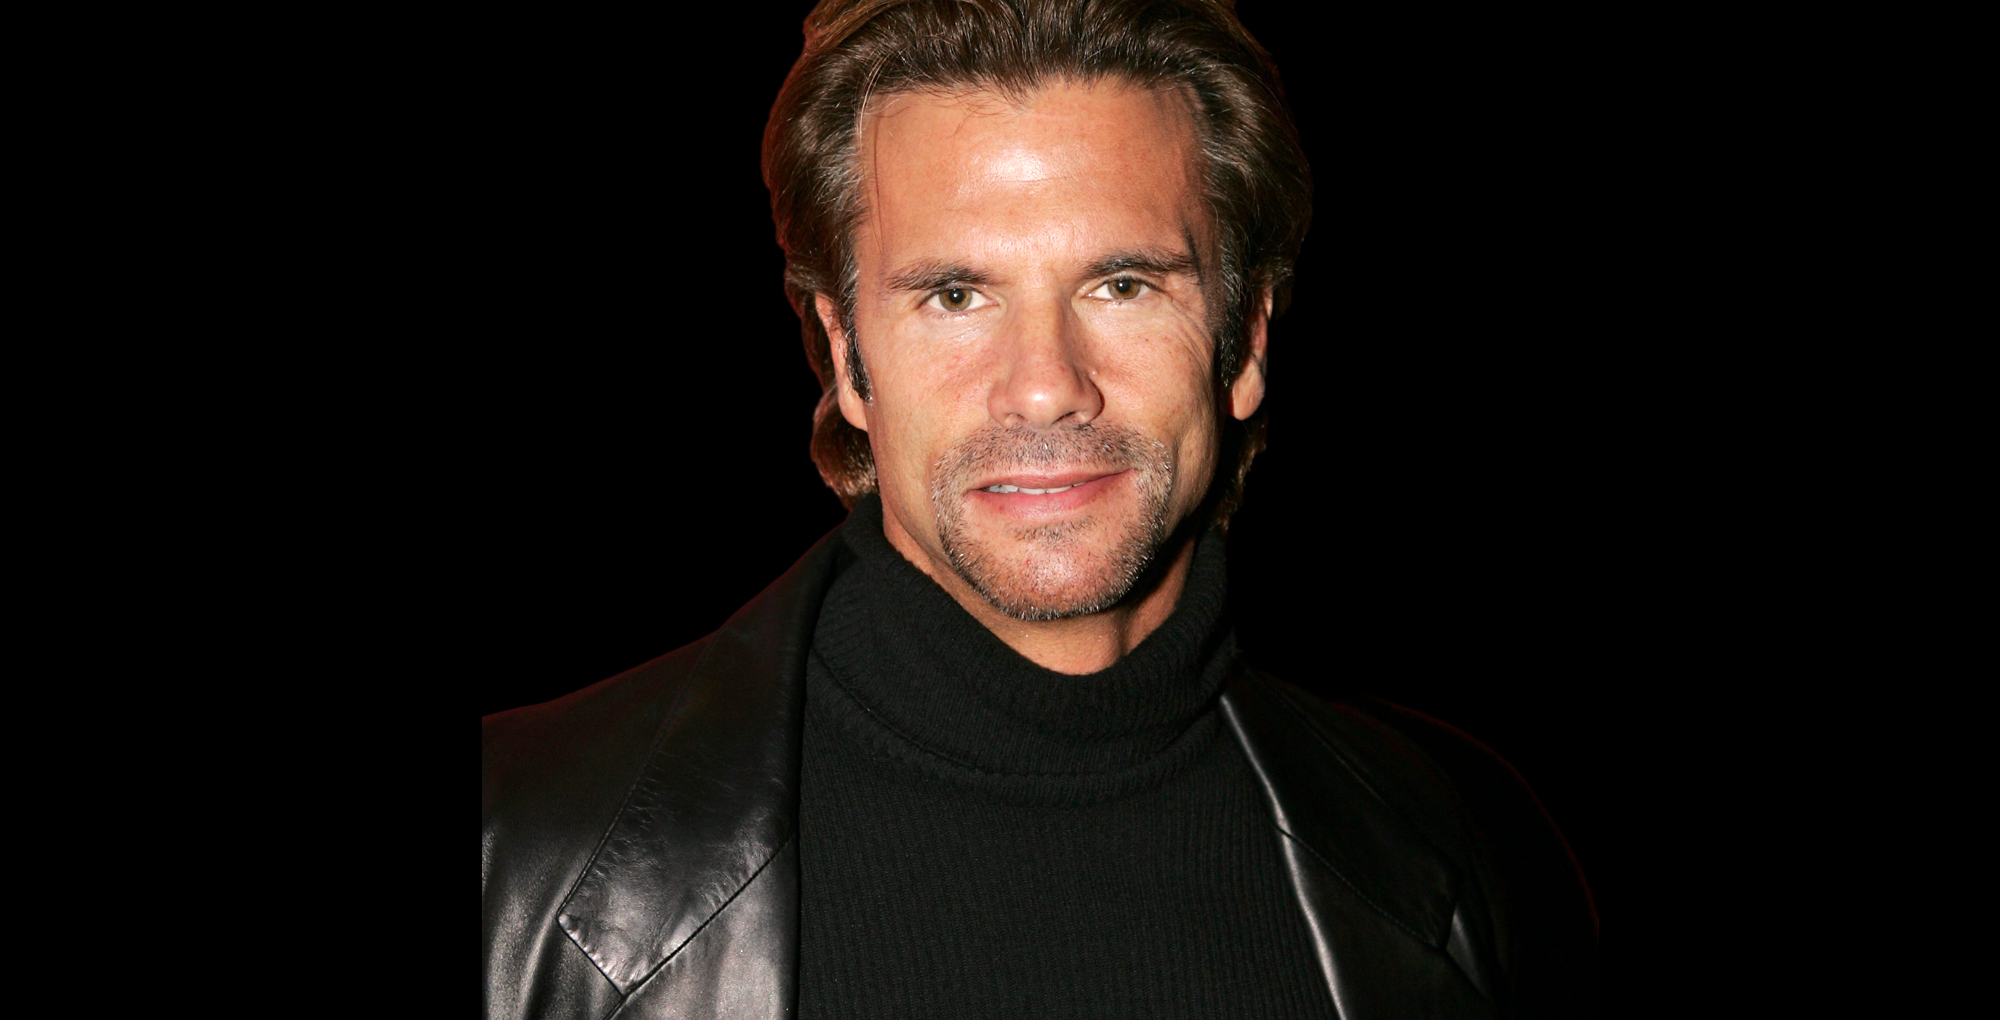 bold and the beautiful alum lorenzo lamas in stubble wearing a black jacket against a black backdrop